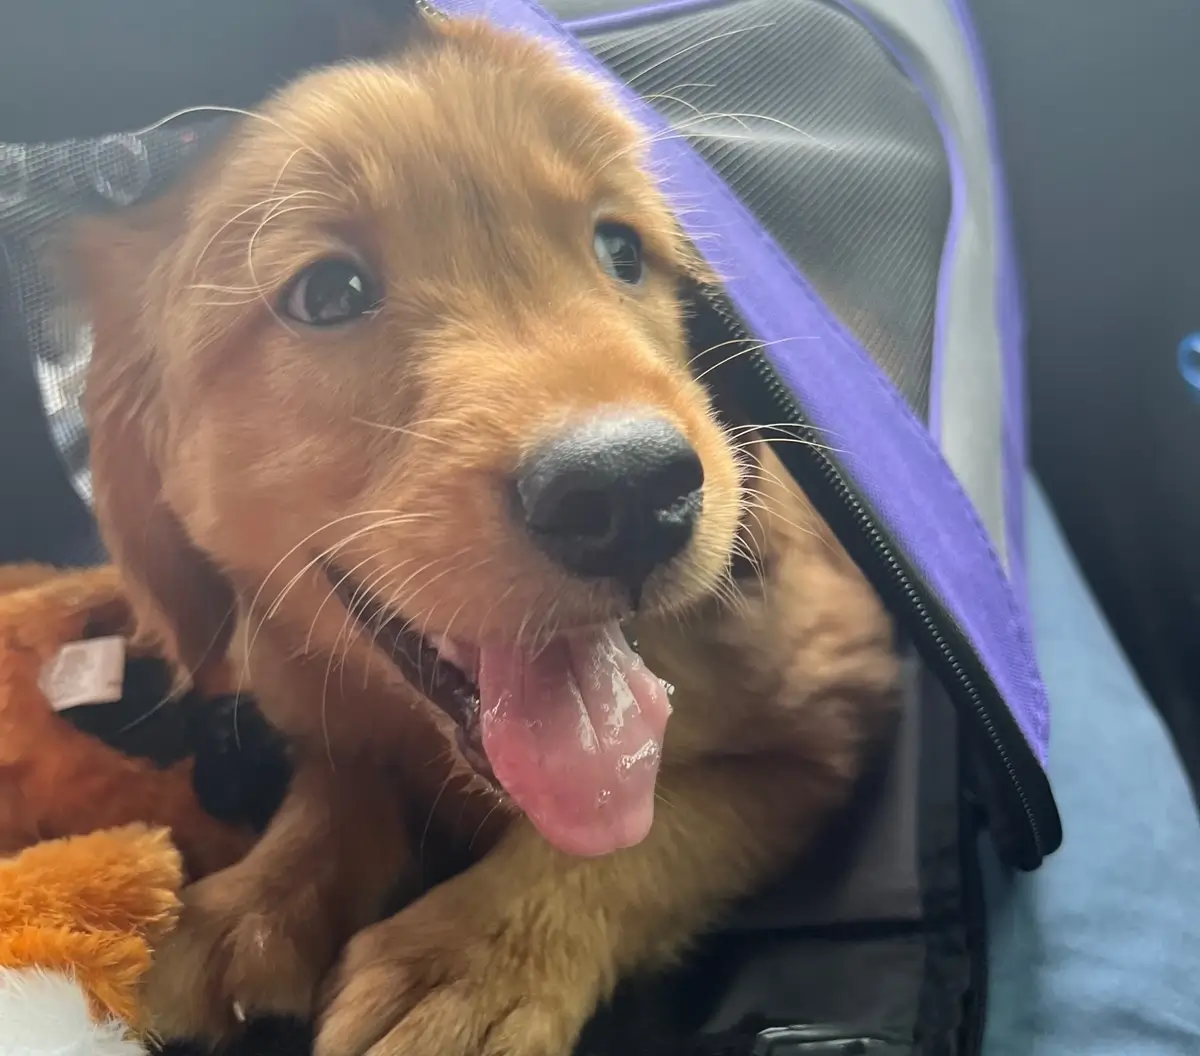 A Golden Retriever puppy with a smile on his face and pink tongue out peeks out of a soft travel carrier